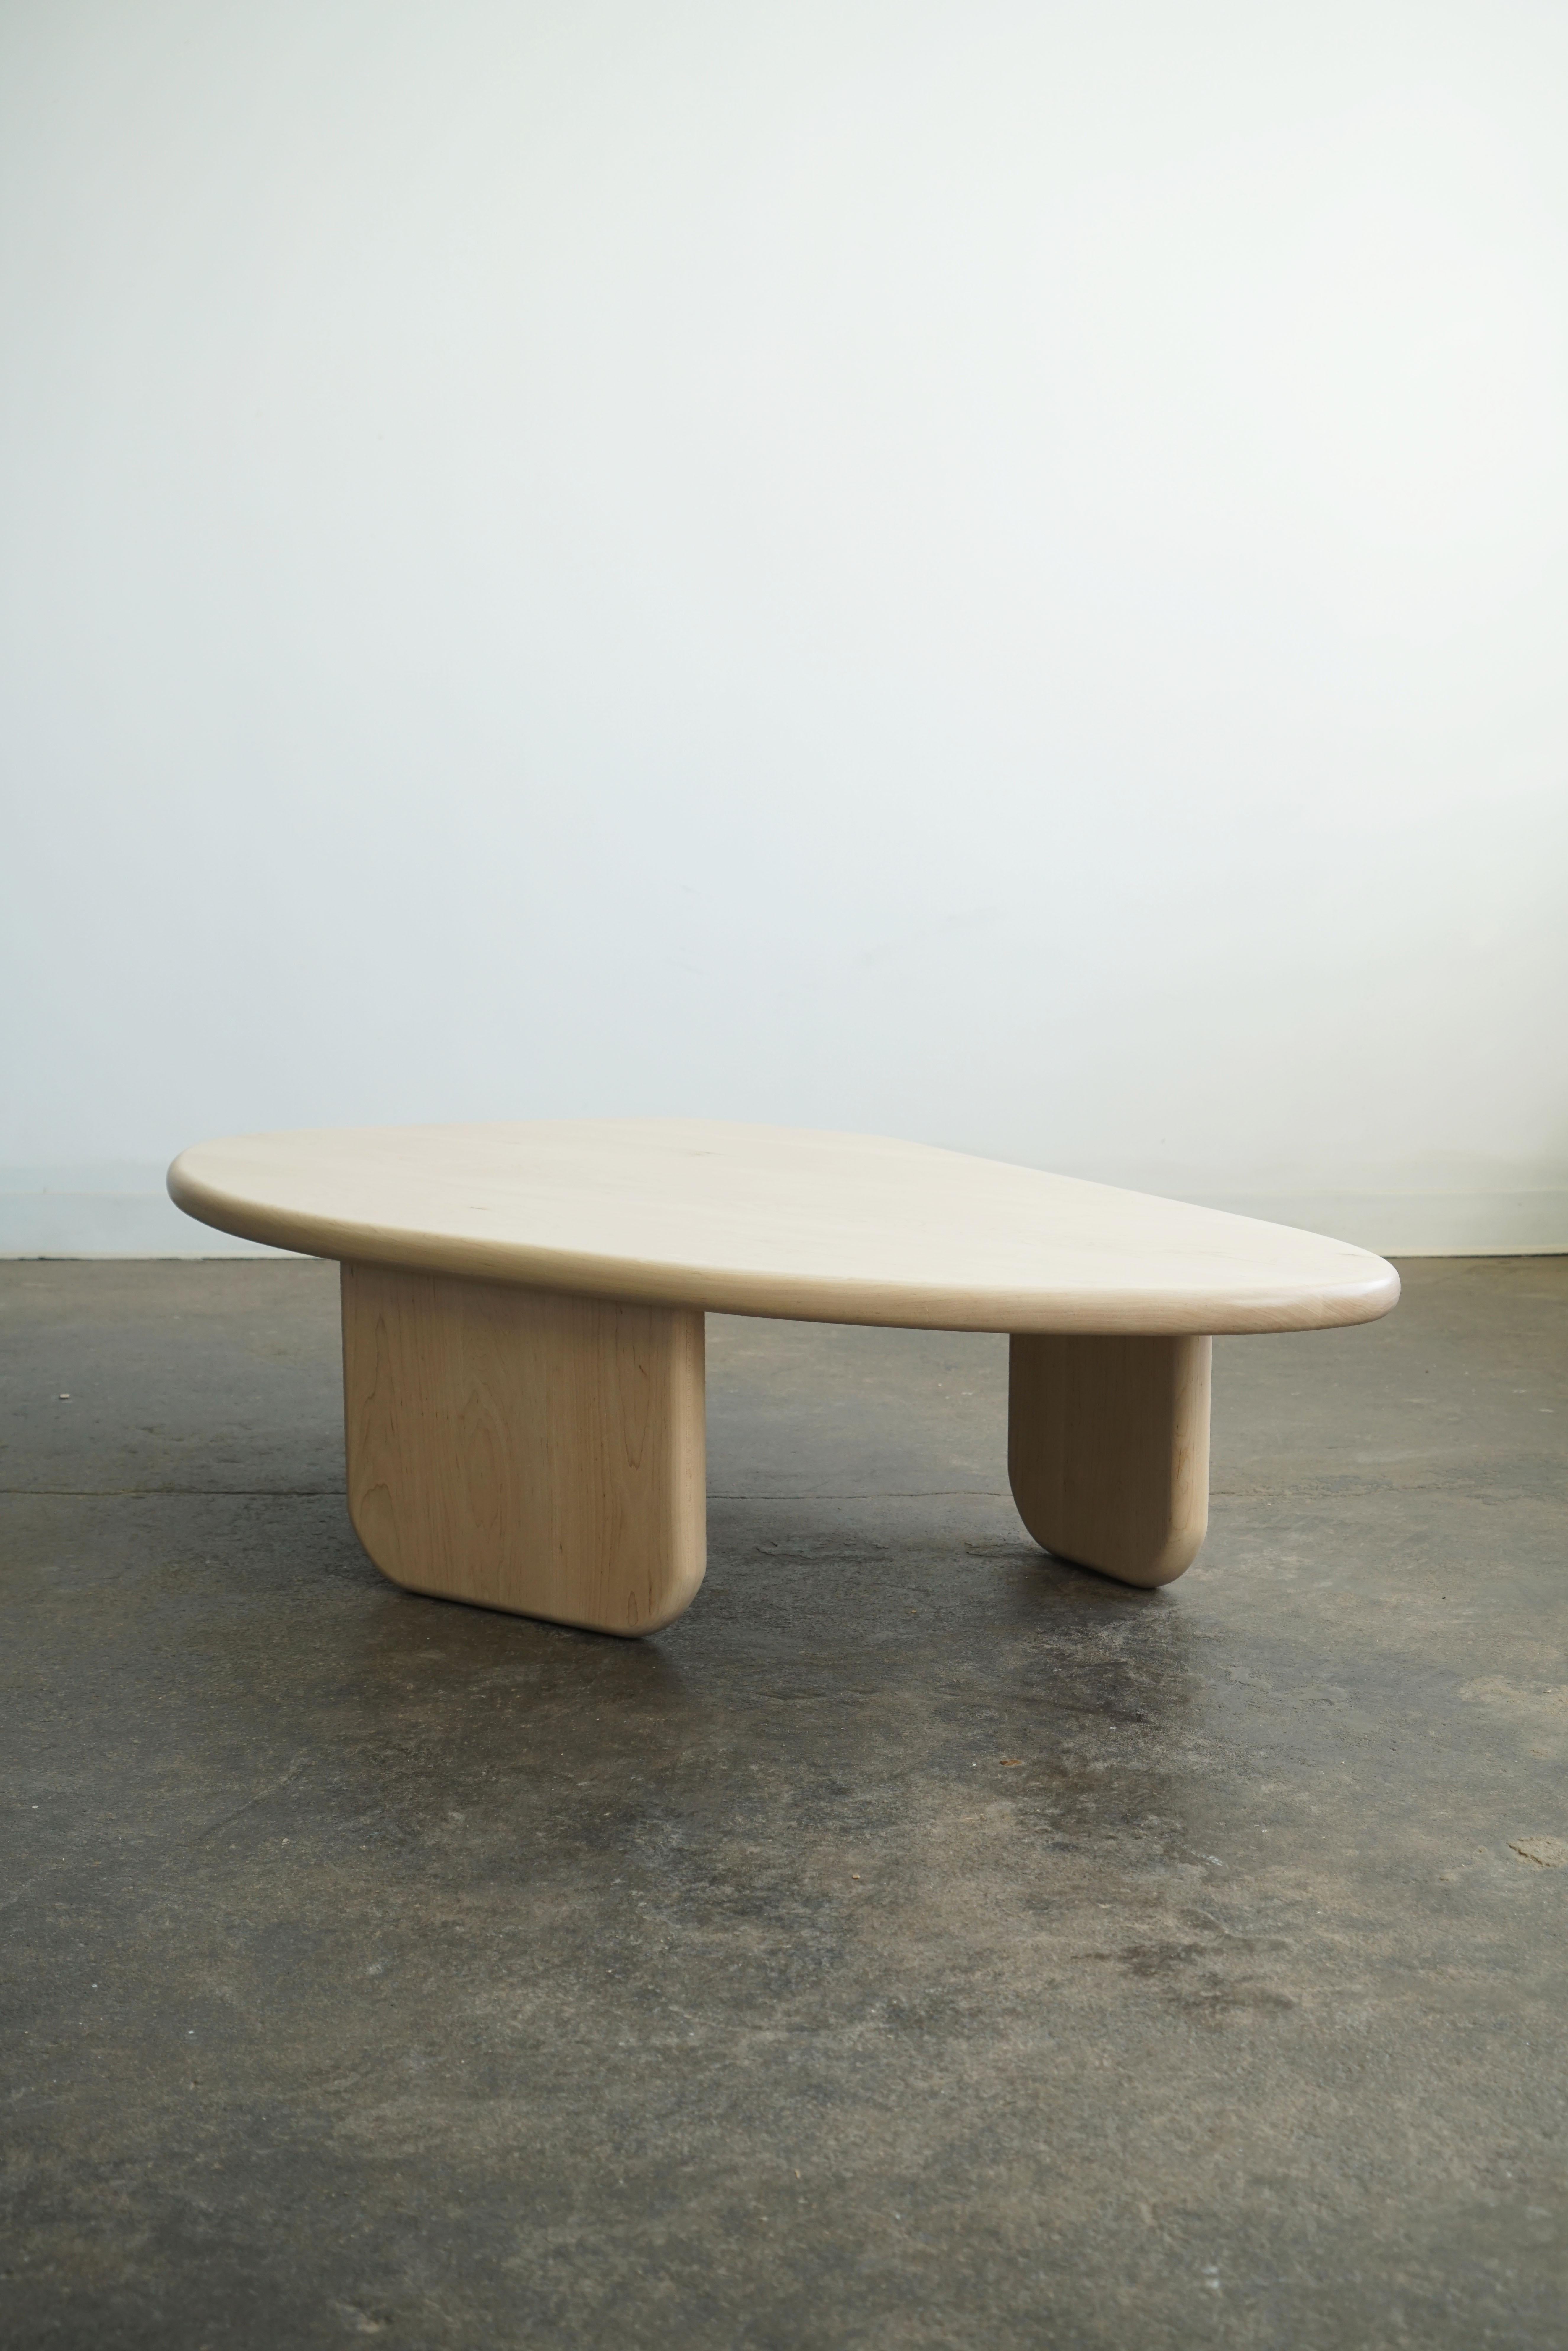 Bleached Organic Shaped Coffee Table by Last Workshop in Maple, Custom options For Sale